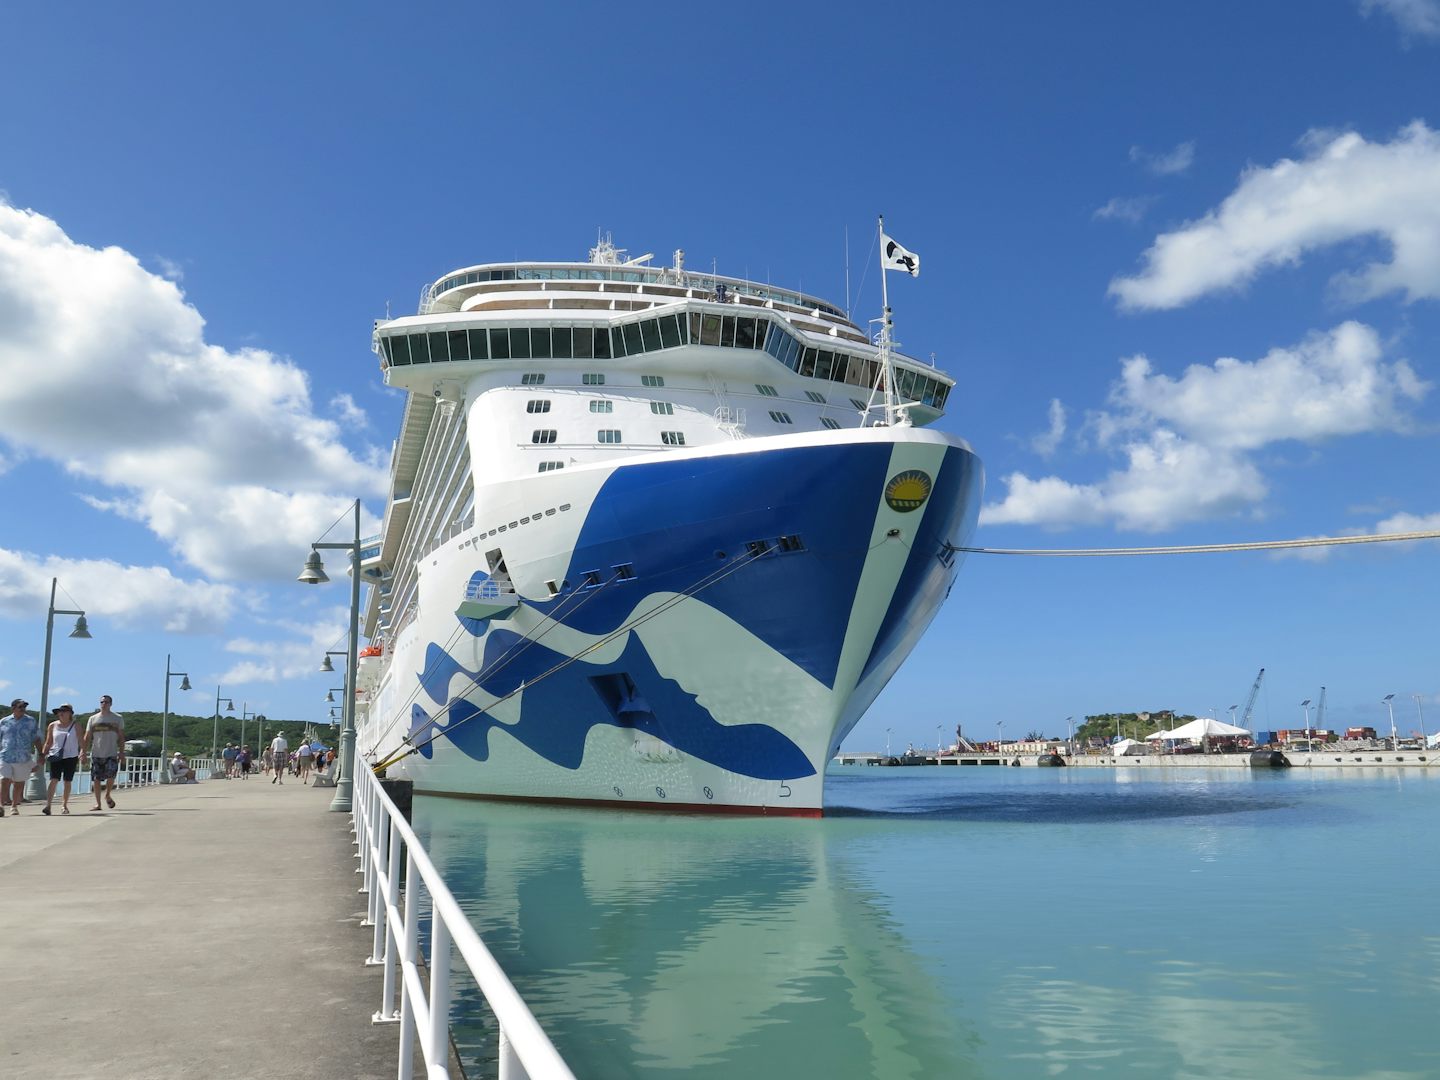 The Royal Princess in port with the landscape of Antigua island.